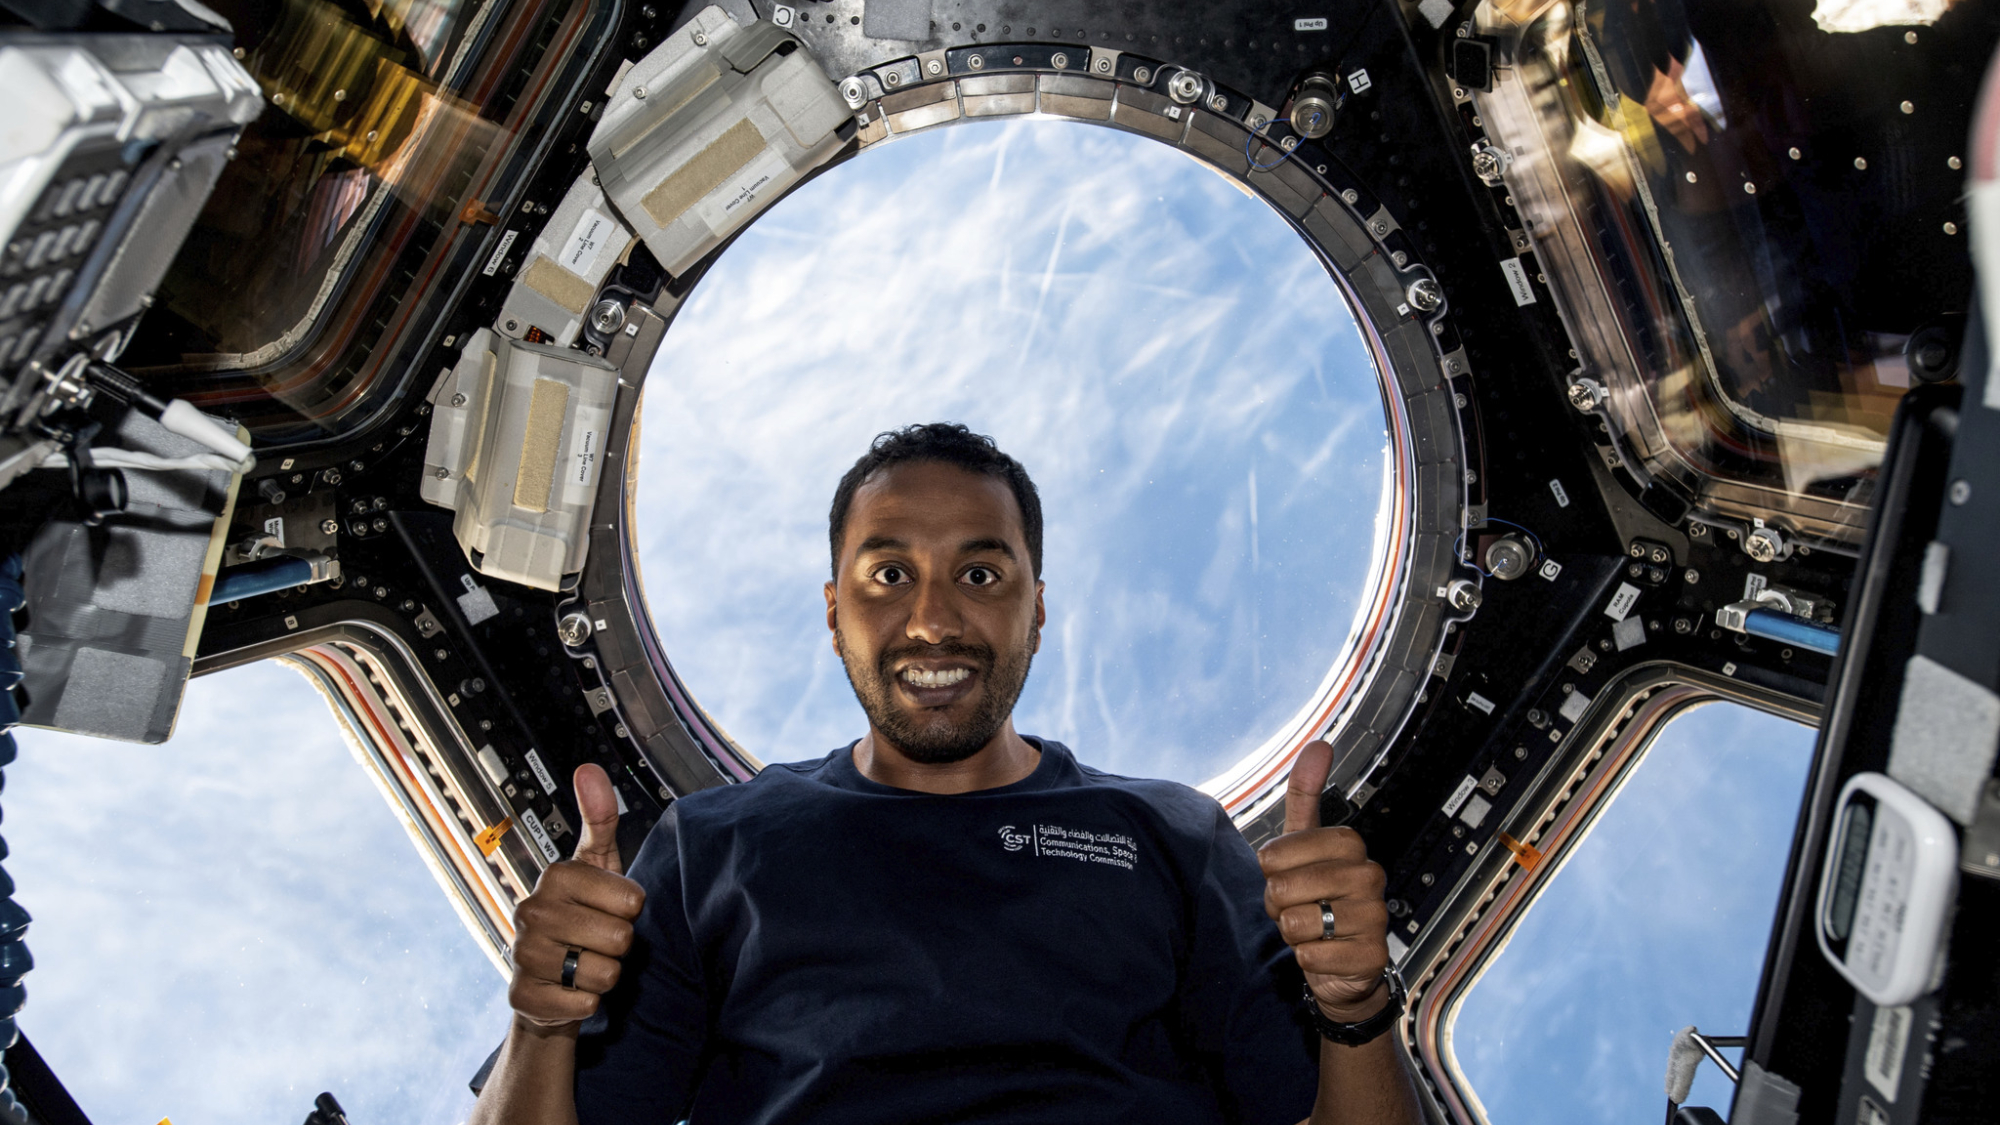 Saudi Space Commission astronaut Ali AlQarni with two thumbs up and the Earth through big windows behind him on the space station